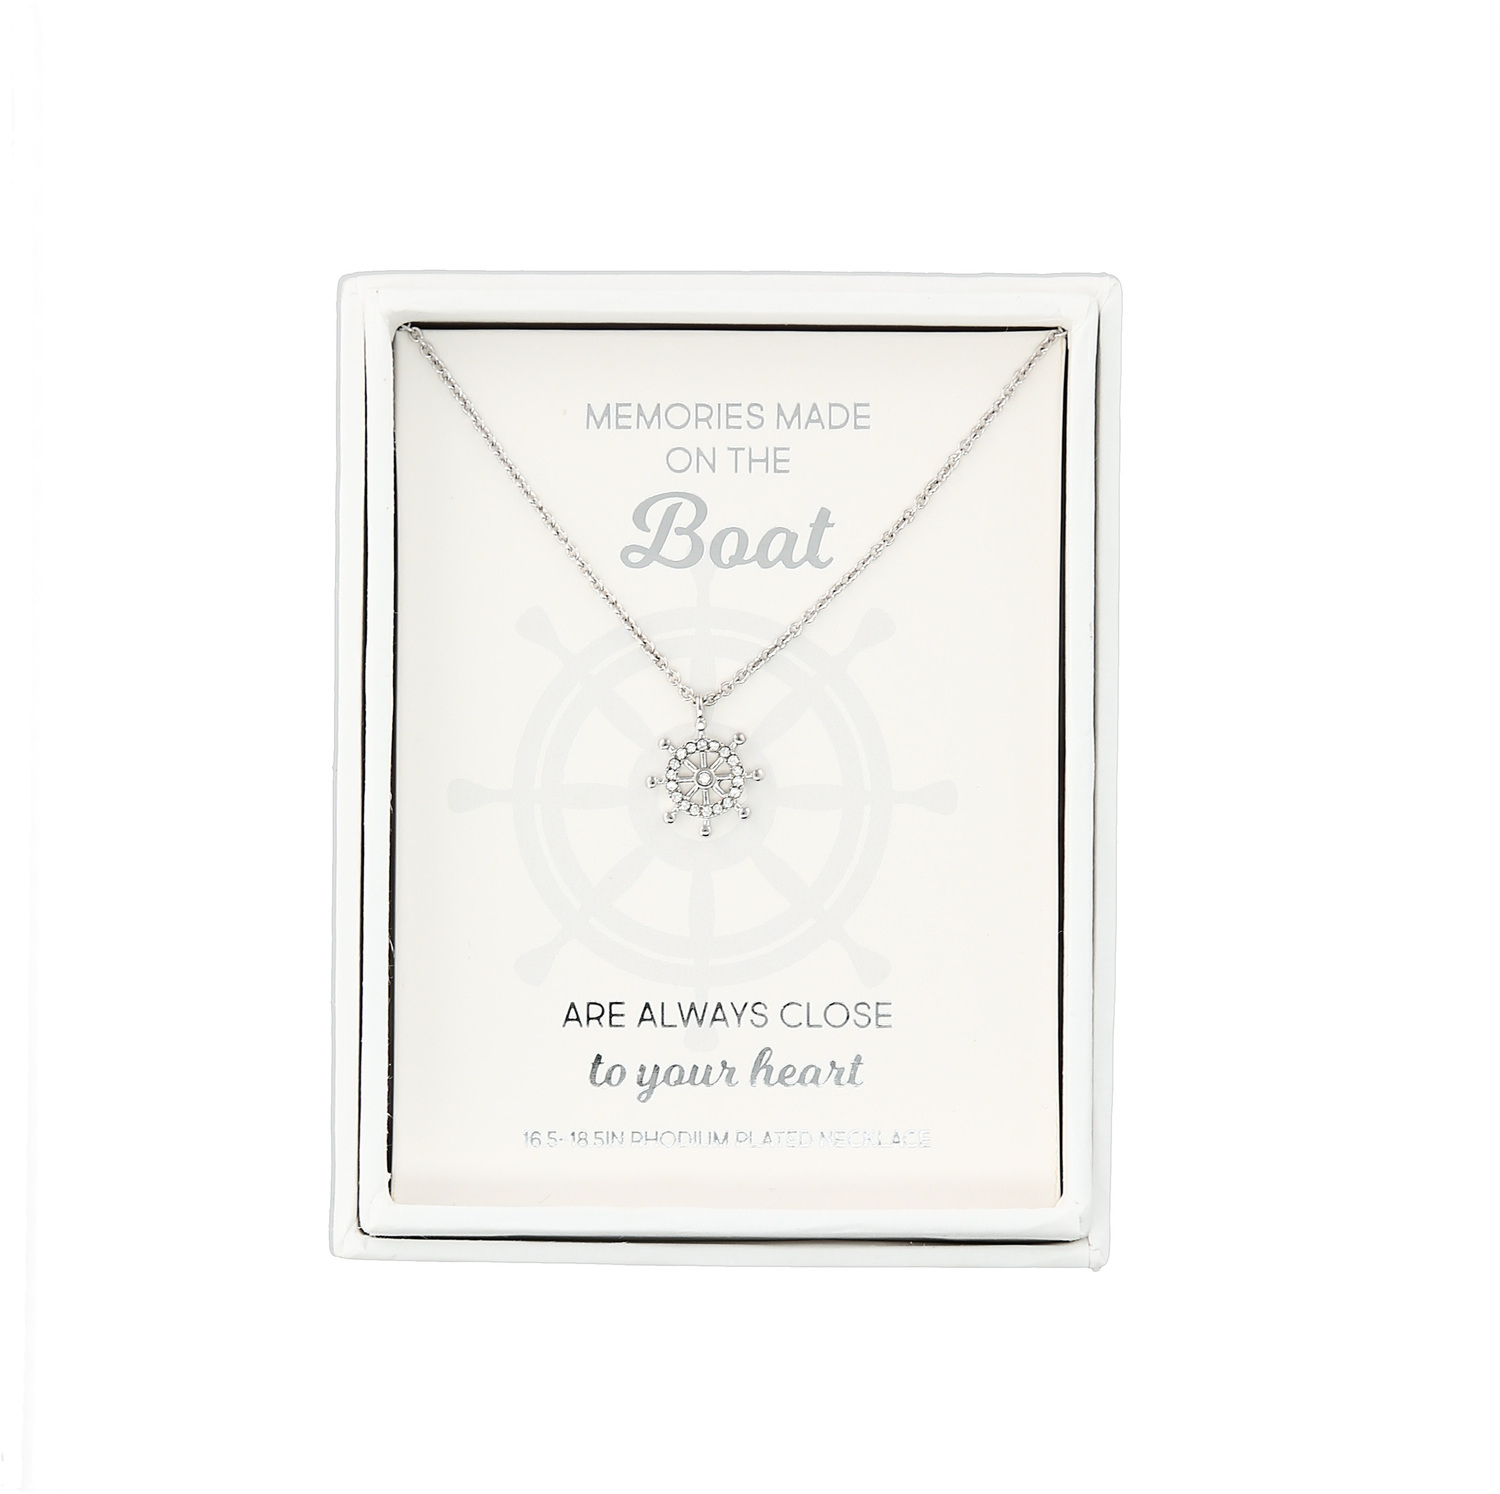 Boat - Ship's Wheel by We People - Boat - Ship's Wheel - 16.5"-18.5" Rhodium Plated Necklace